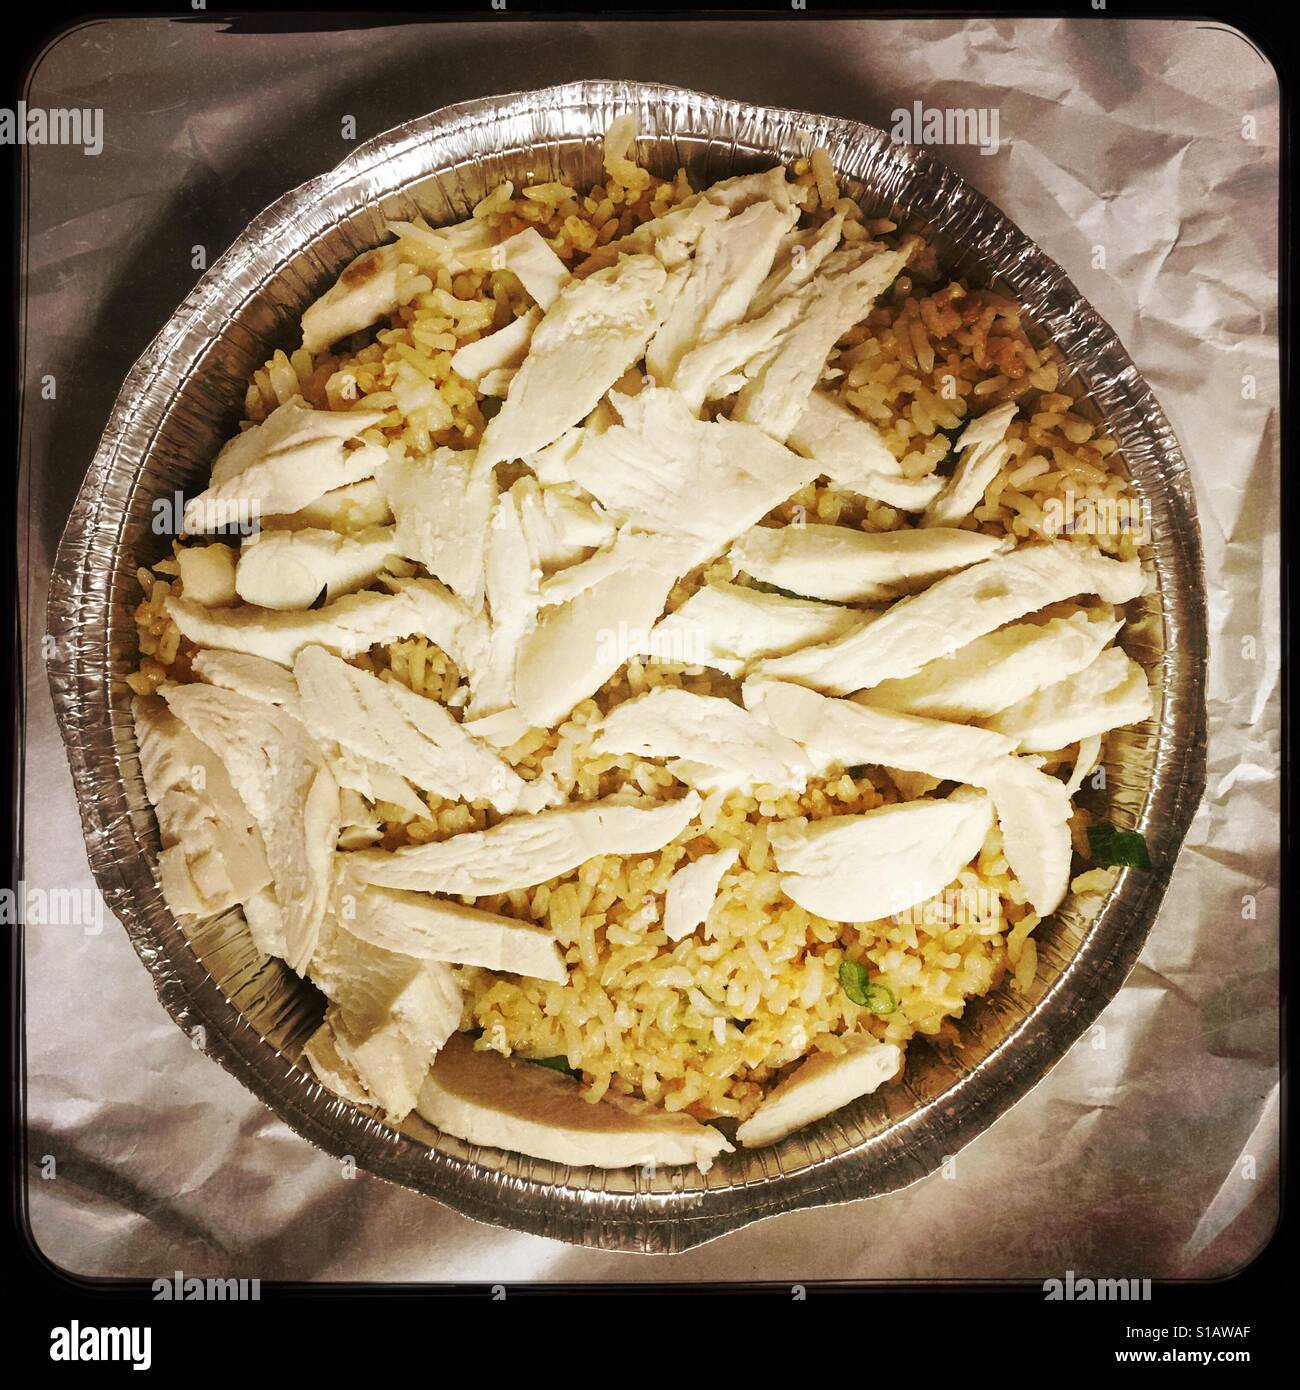 Chicken fried rice take away meal Stock Photo